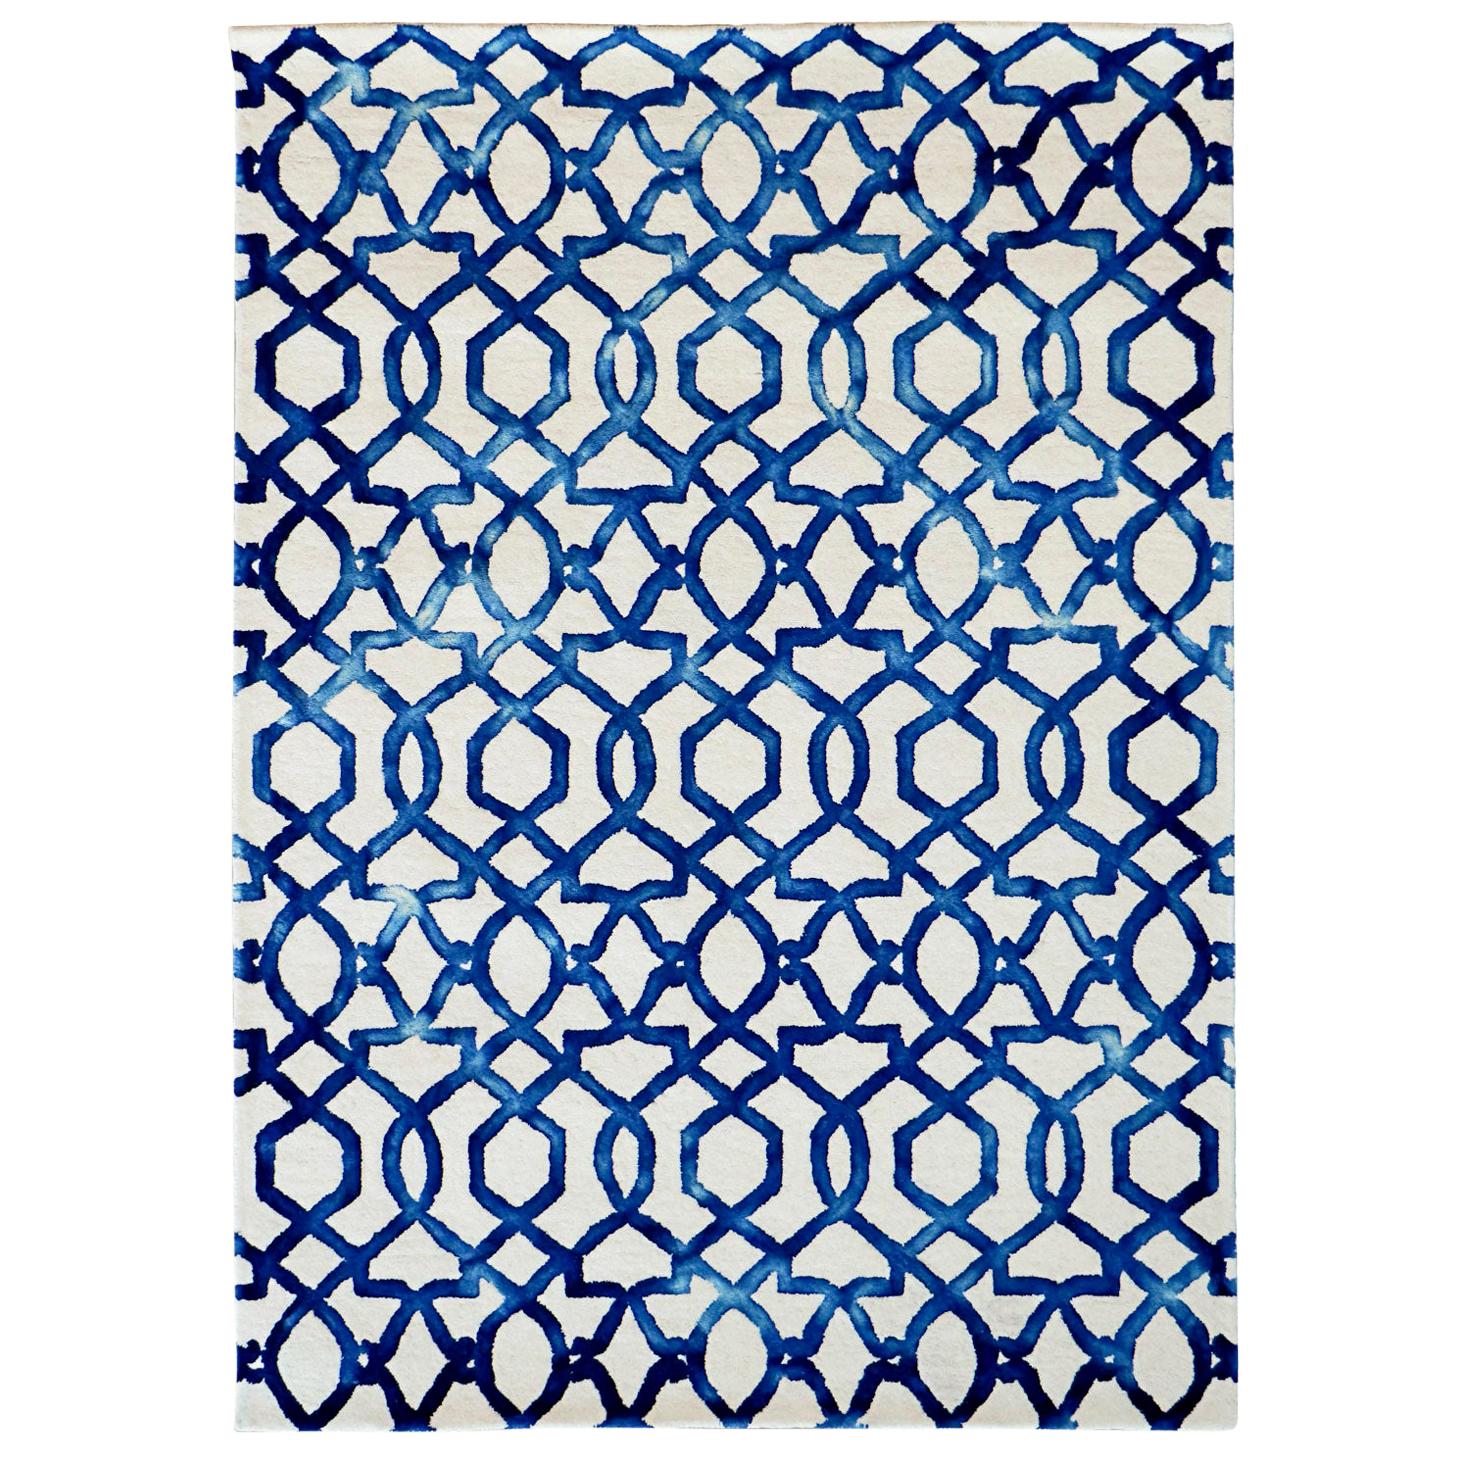 Contemporary Modern Rug New Zealand Wool by Deanna Comellini 140x200 cm For Sale